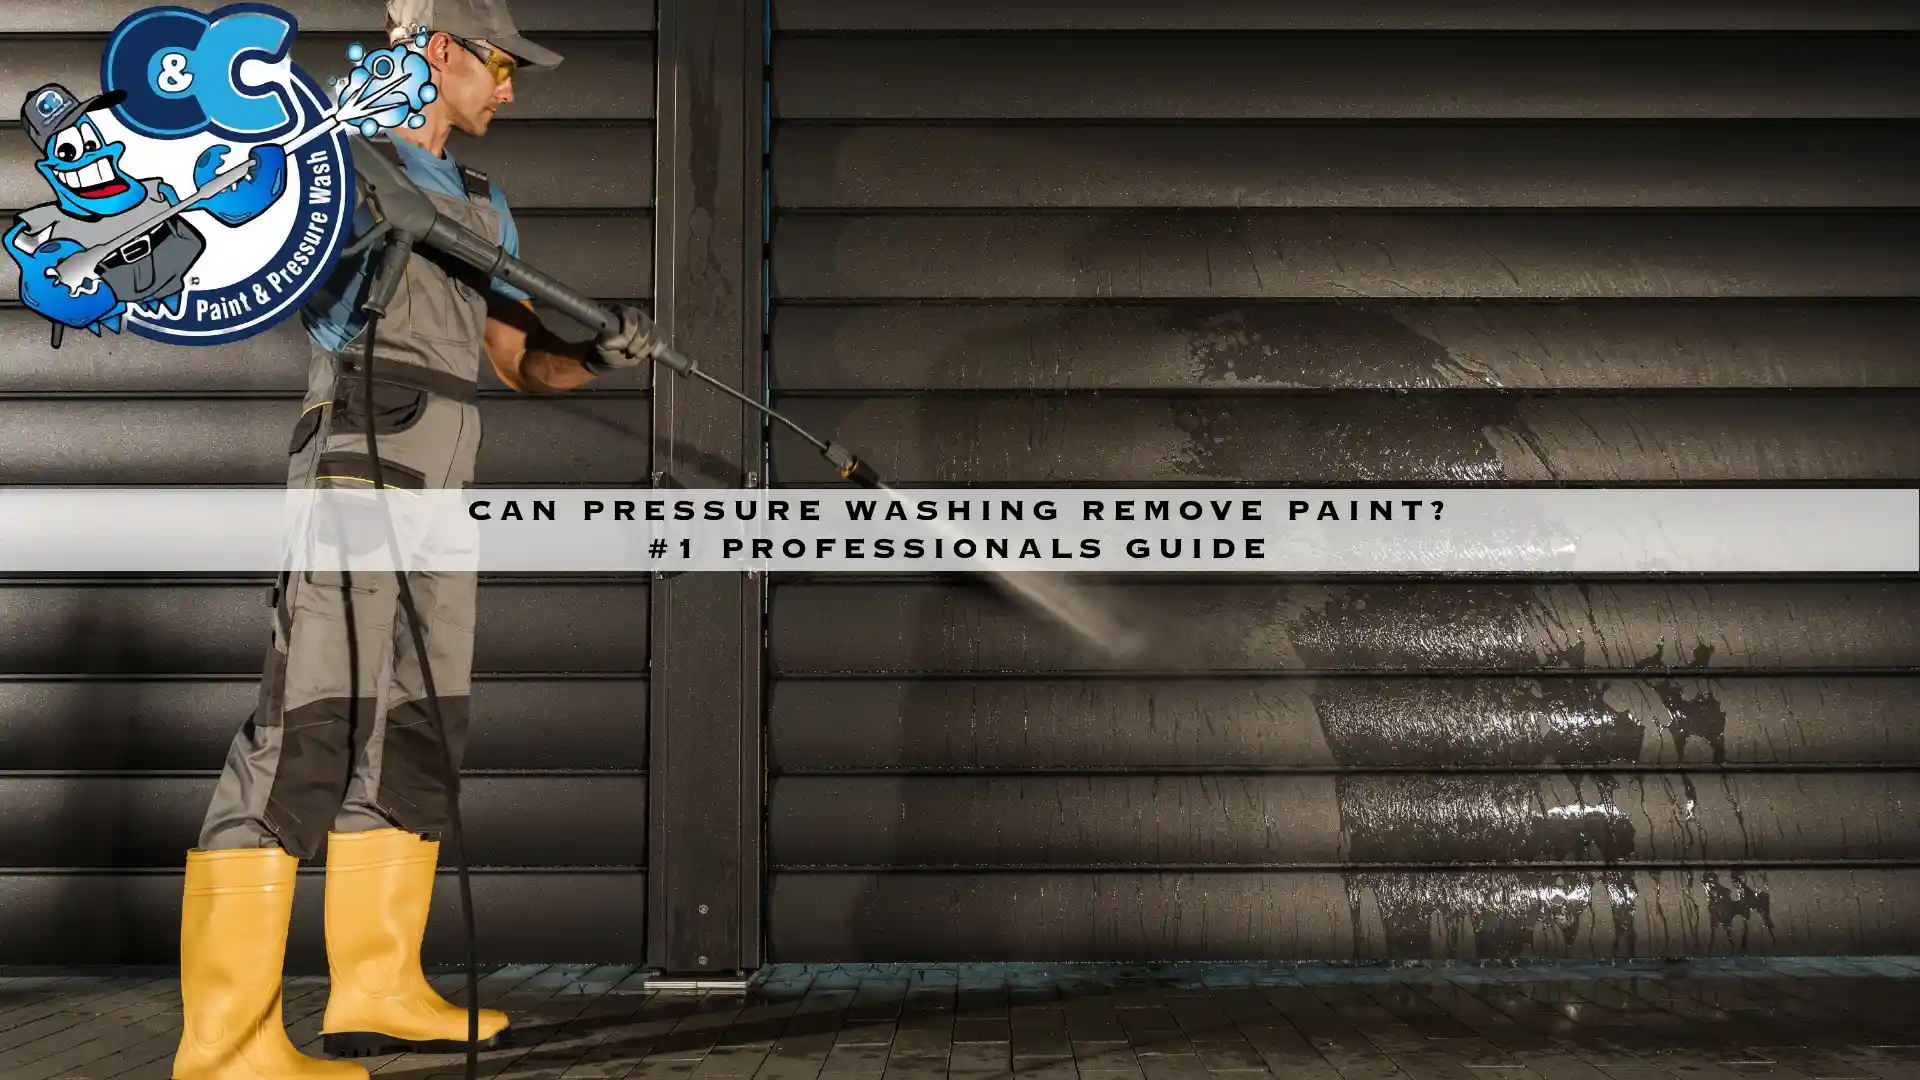 Can Pressure Washing Remove Paint? #1 Professionals Guide